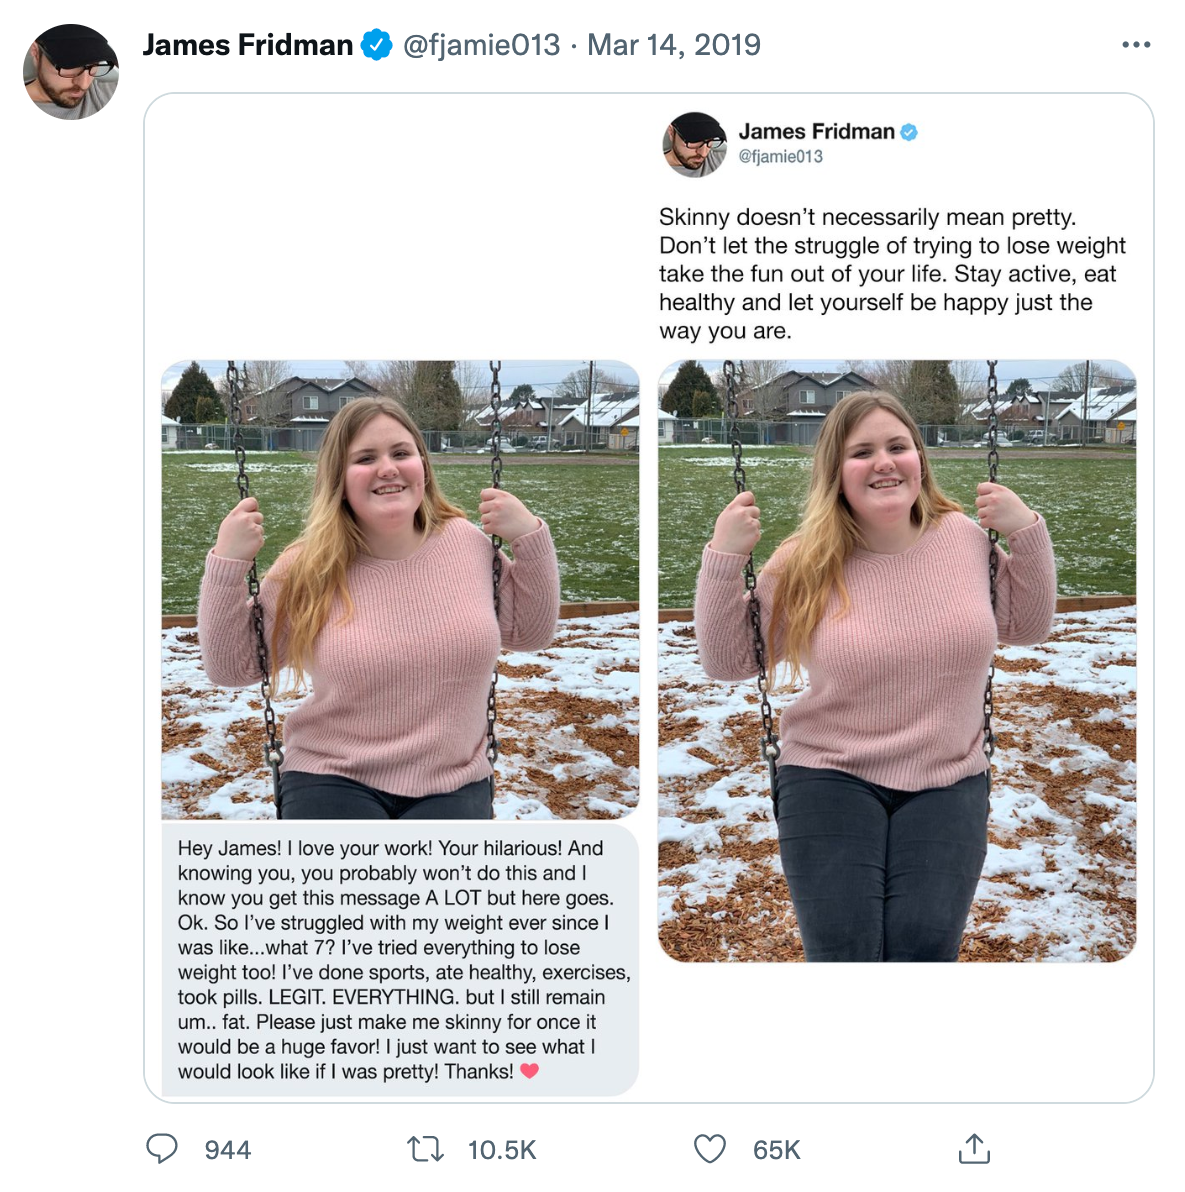 wholesome photoshop edits - james fridman - James Fridman Hey James! I love your work! Your hilarious! And knowing you, you probably won't do this and I know you get this message A Lot but here goes. Ok. So I've struggled with my weight ever since 1 was .